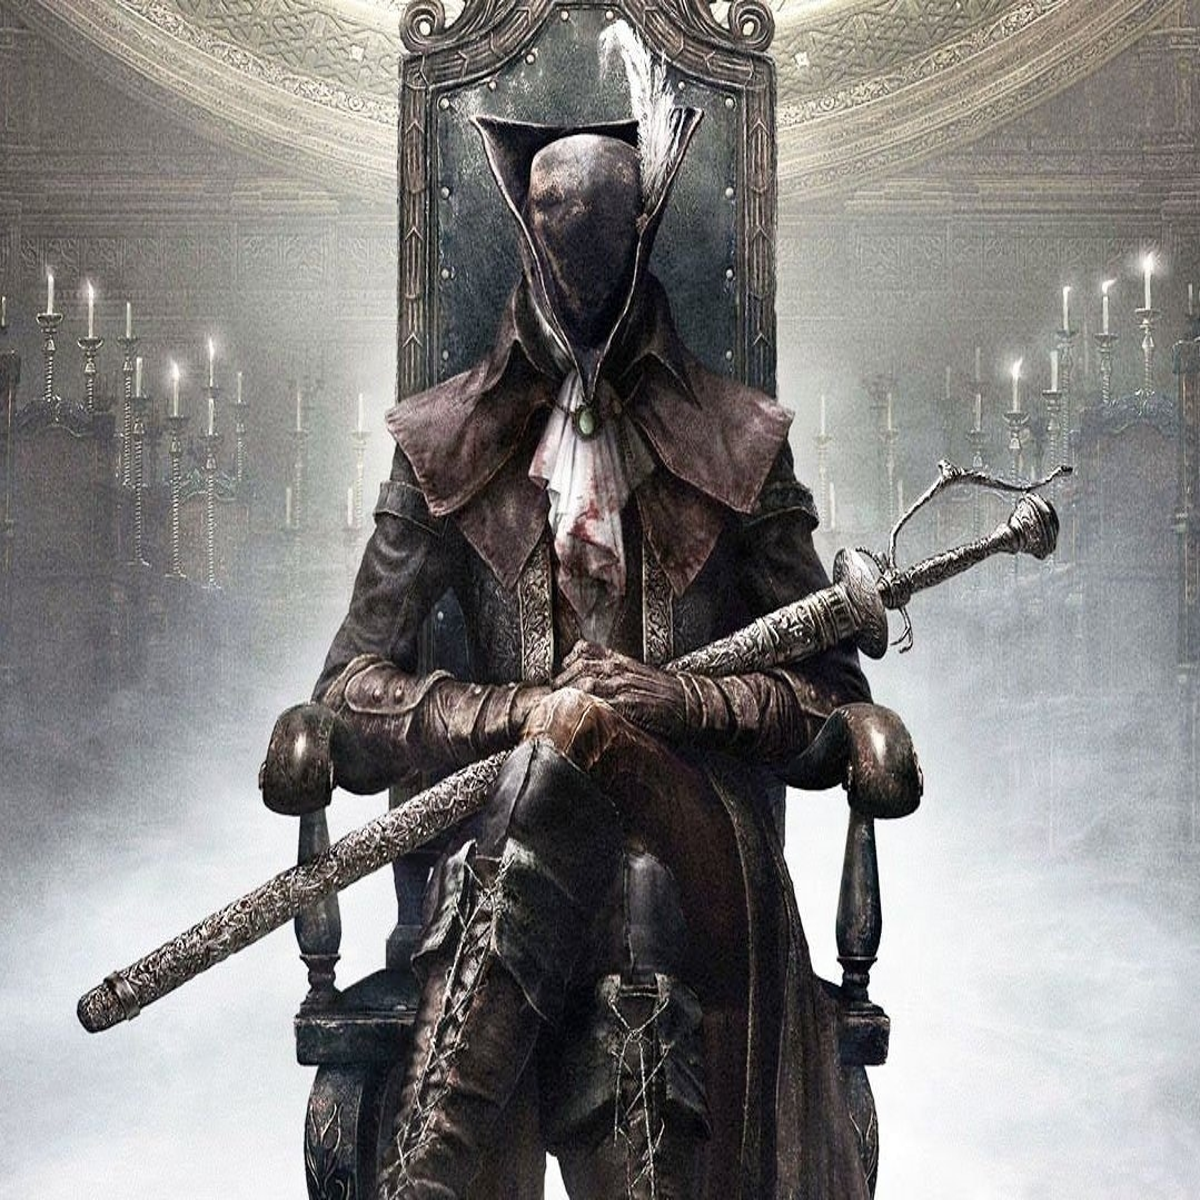 Bloodborne™ The Old Hunters